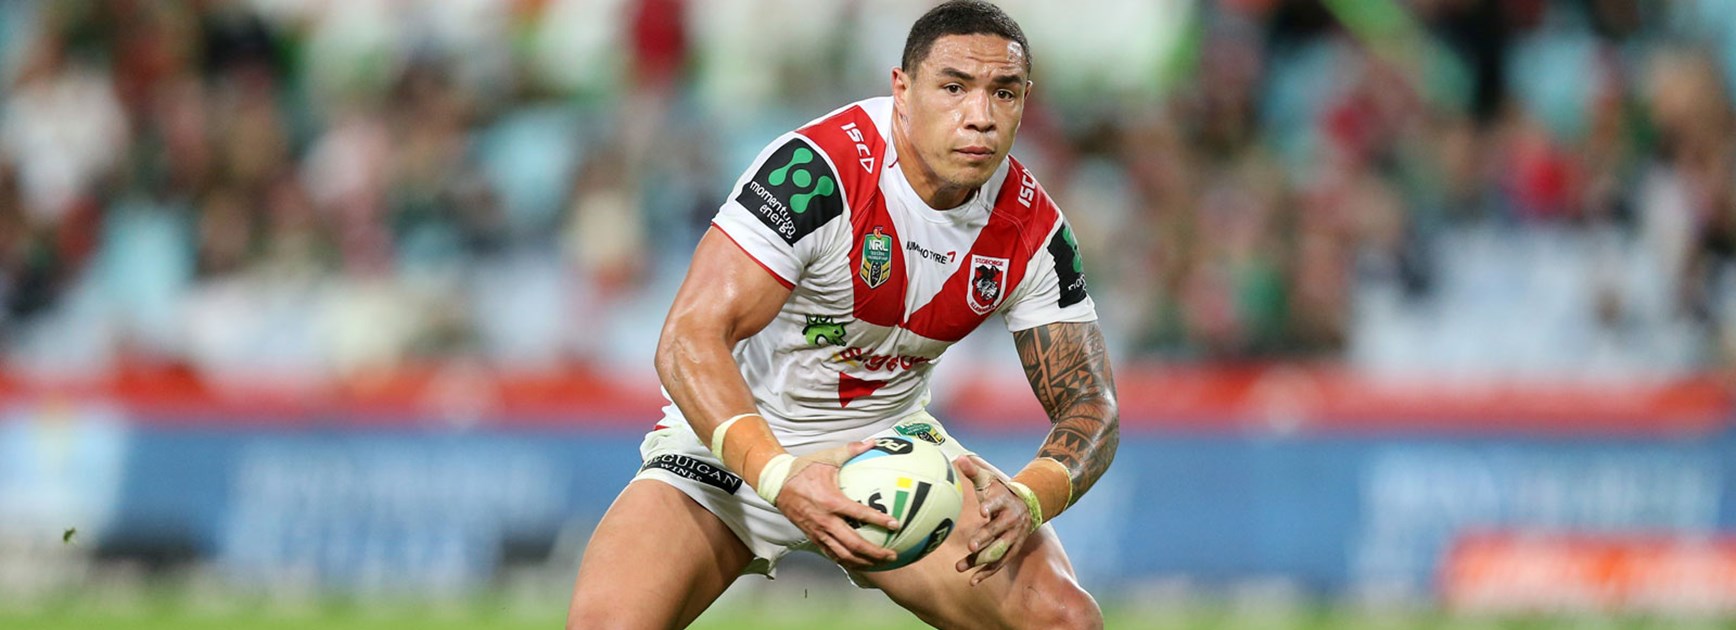 Tyson Frizell made over 30 tackles and more than 100 metres in the Dragons' Round 9 loss to South Sydney.